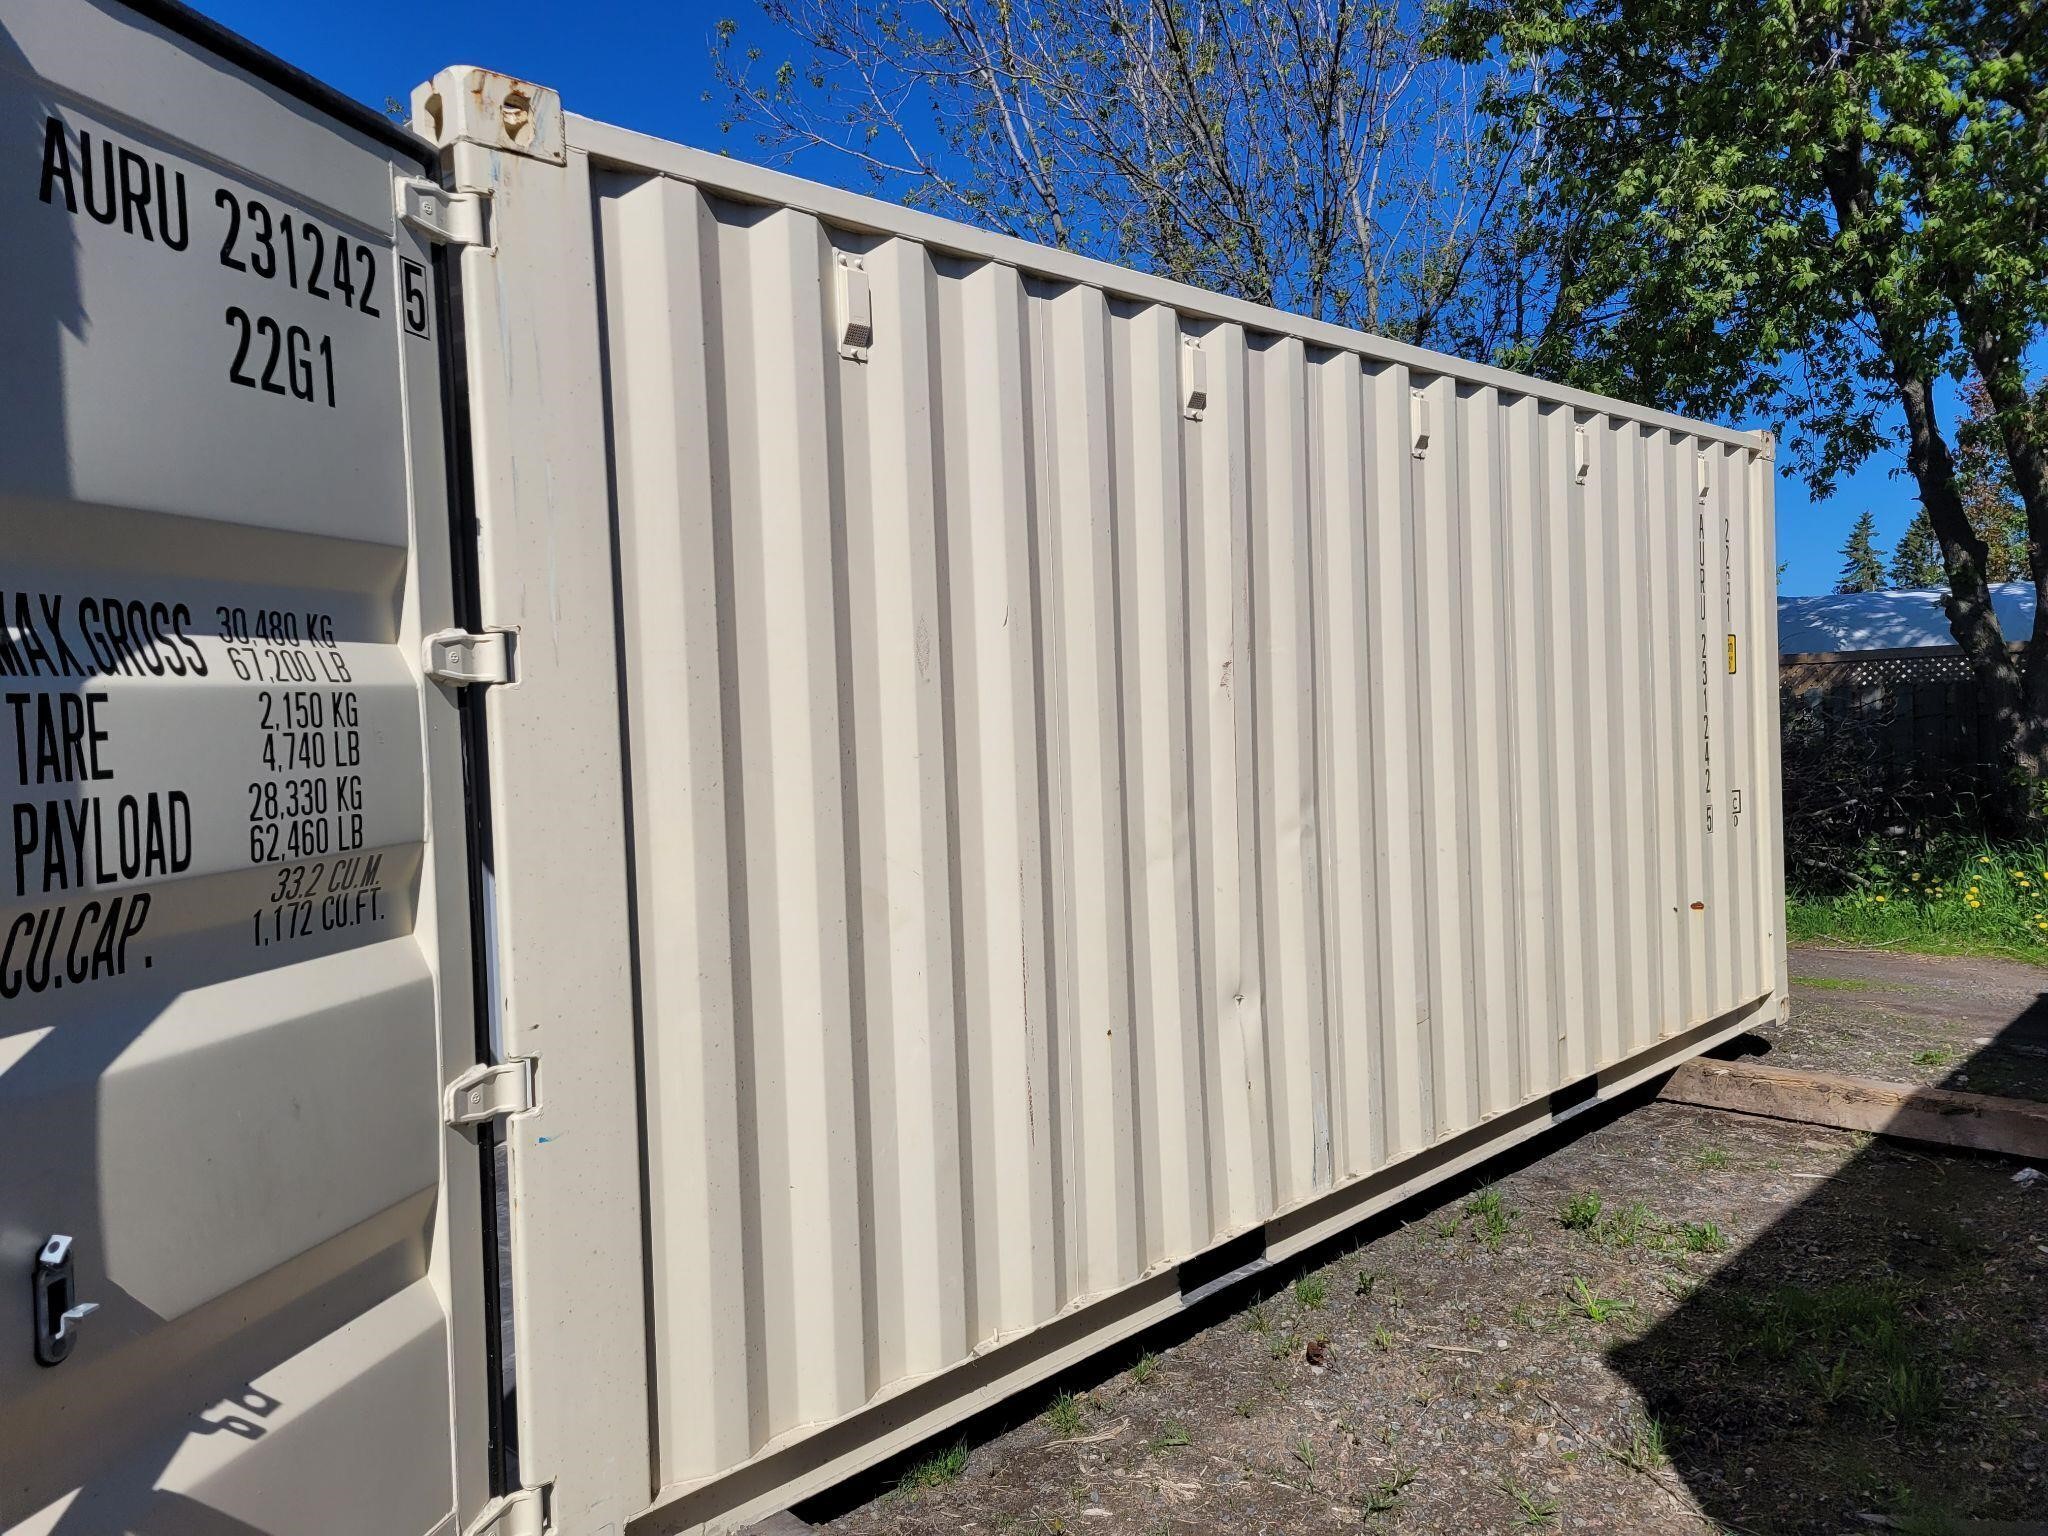 20' Sea Can/Shipping Container